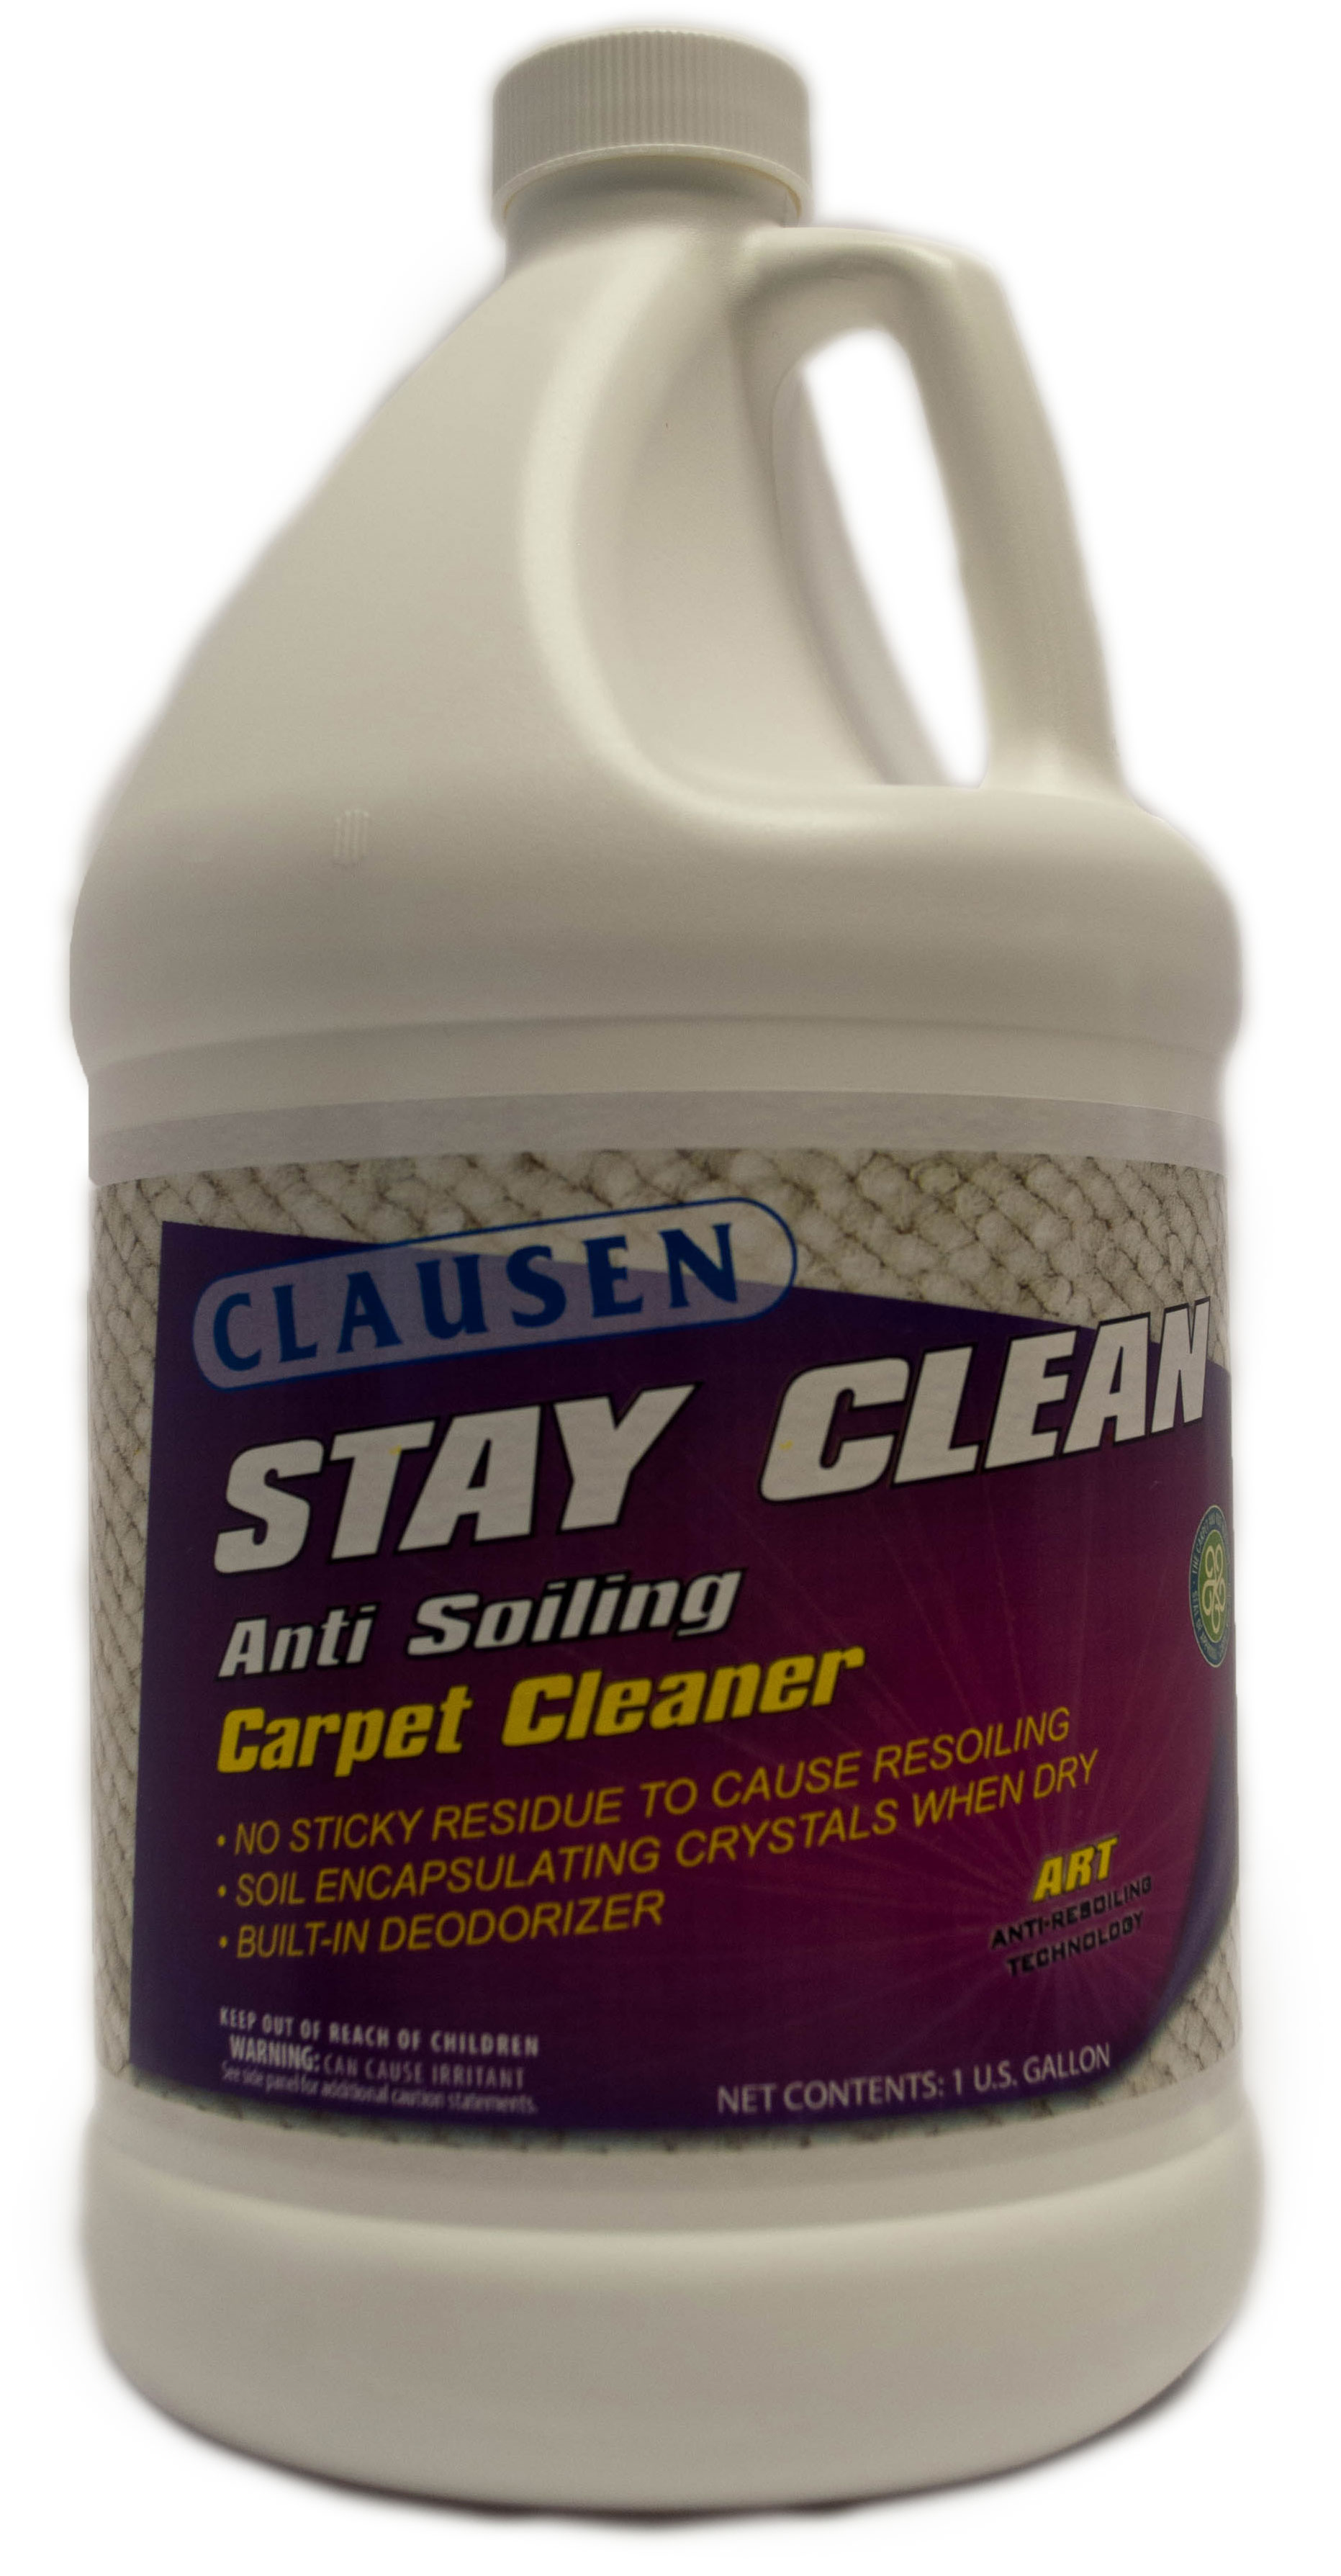 Clausen Stay Clean Anti Soiling Carpet Cleaner Gallon